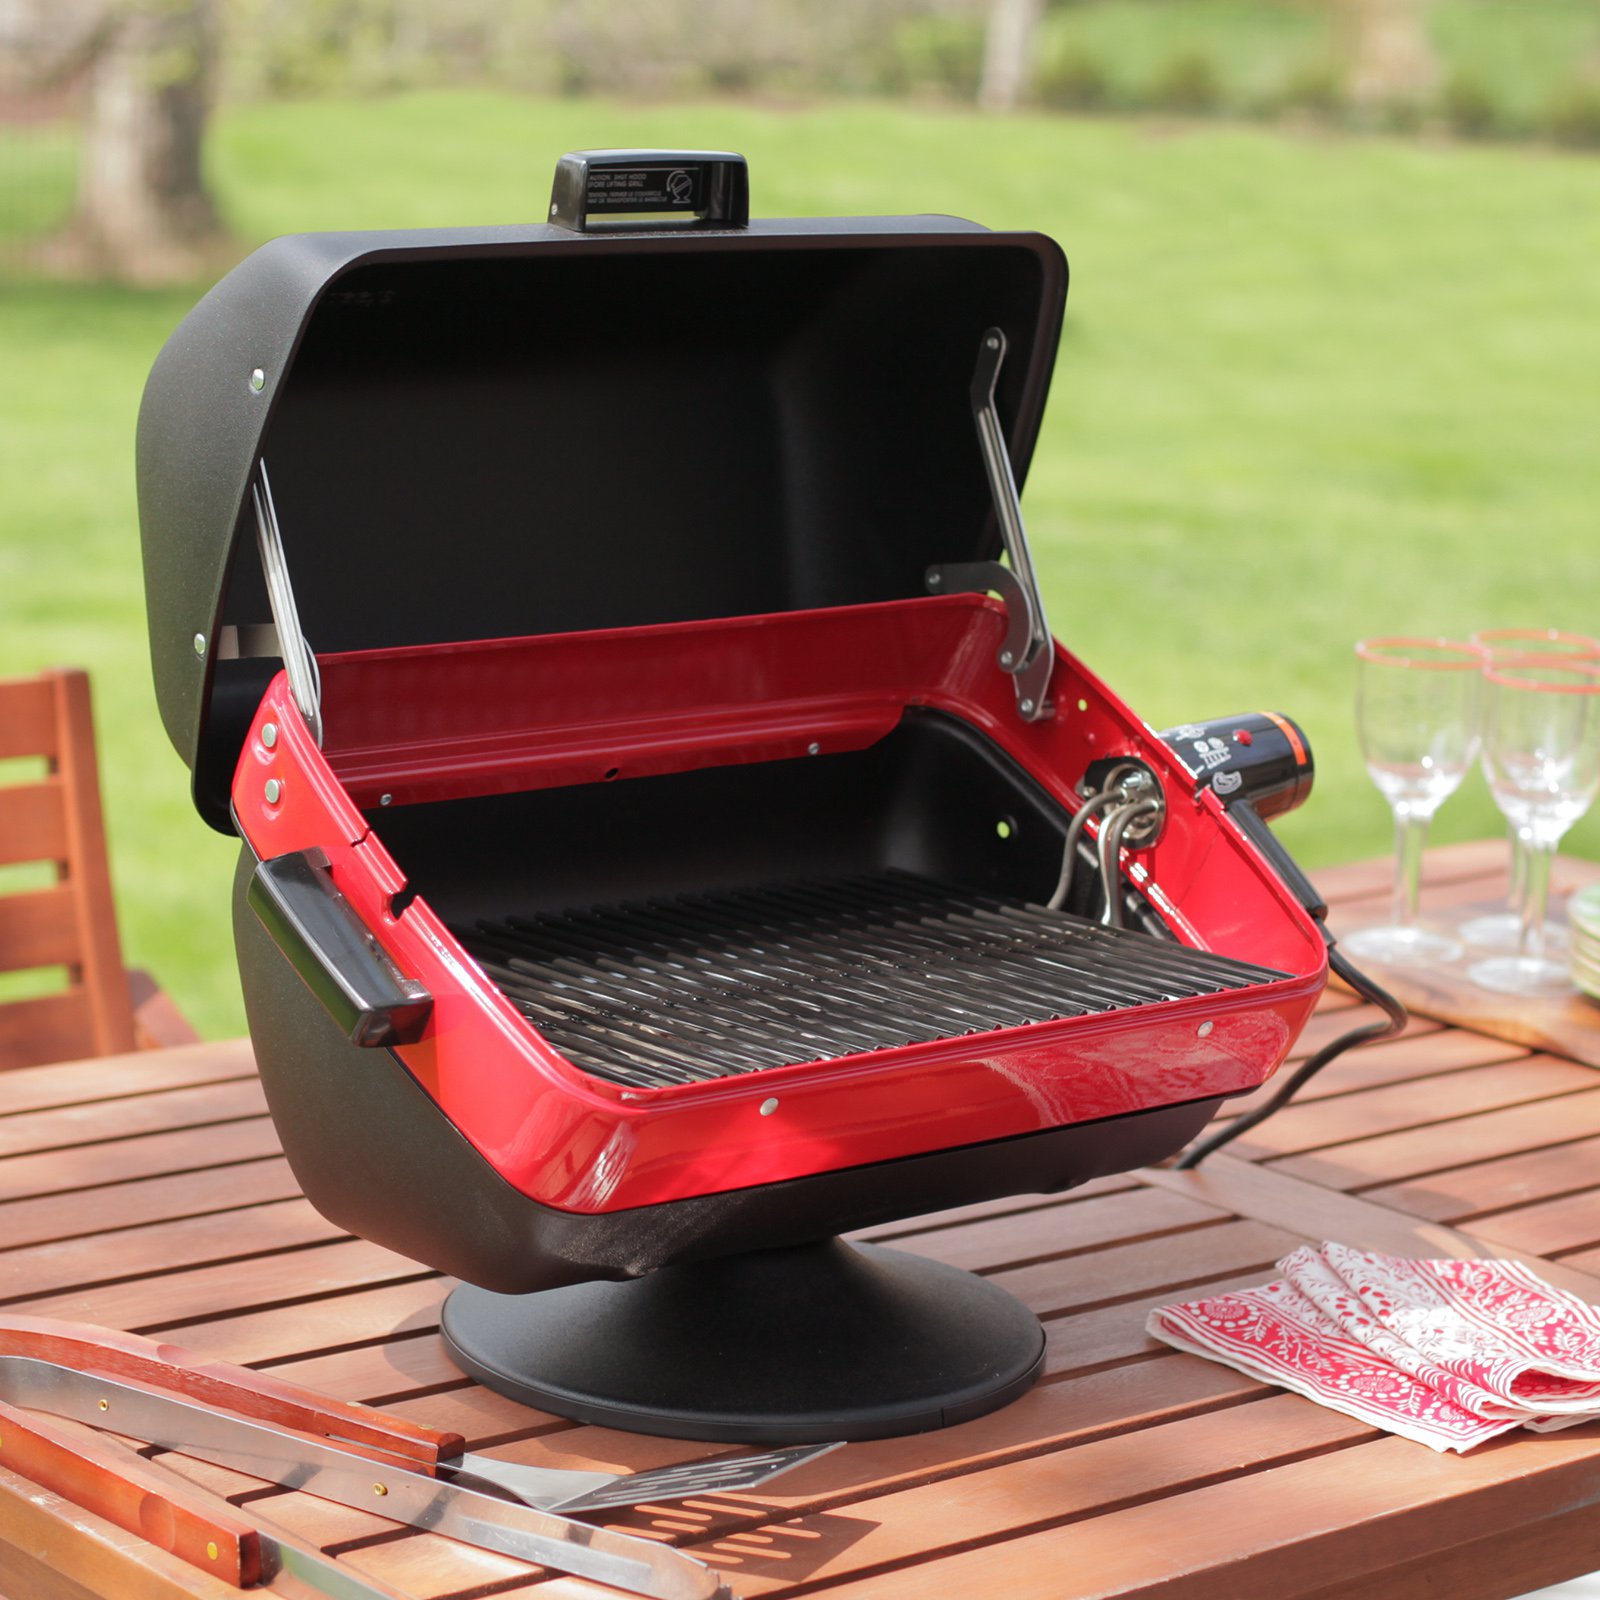 Americana Tabletop Grill with 3-position element - image 1 of 5